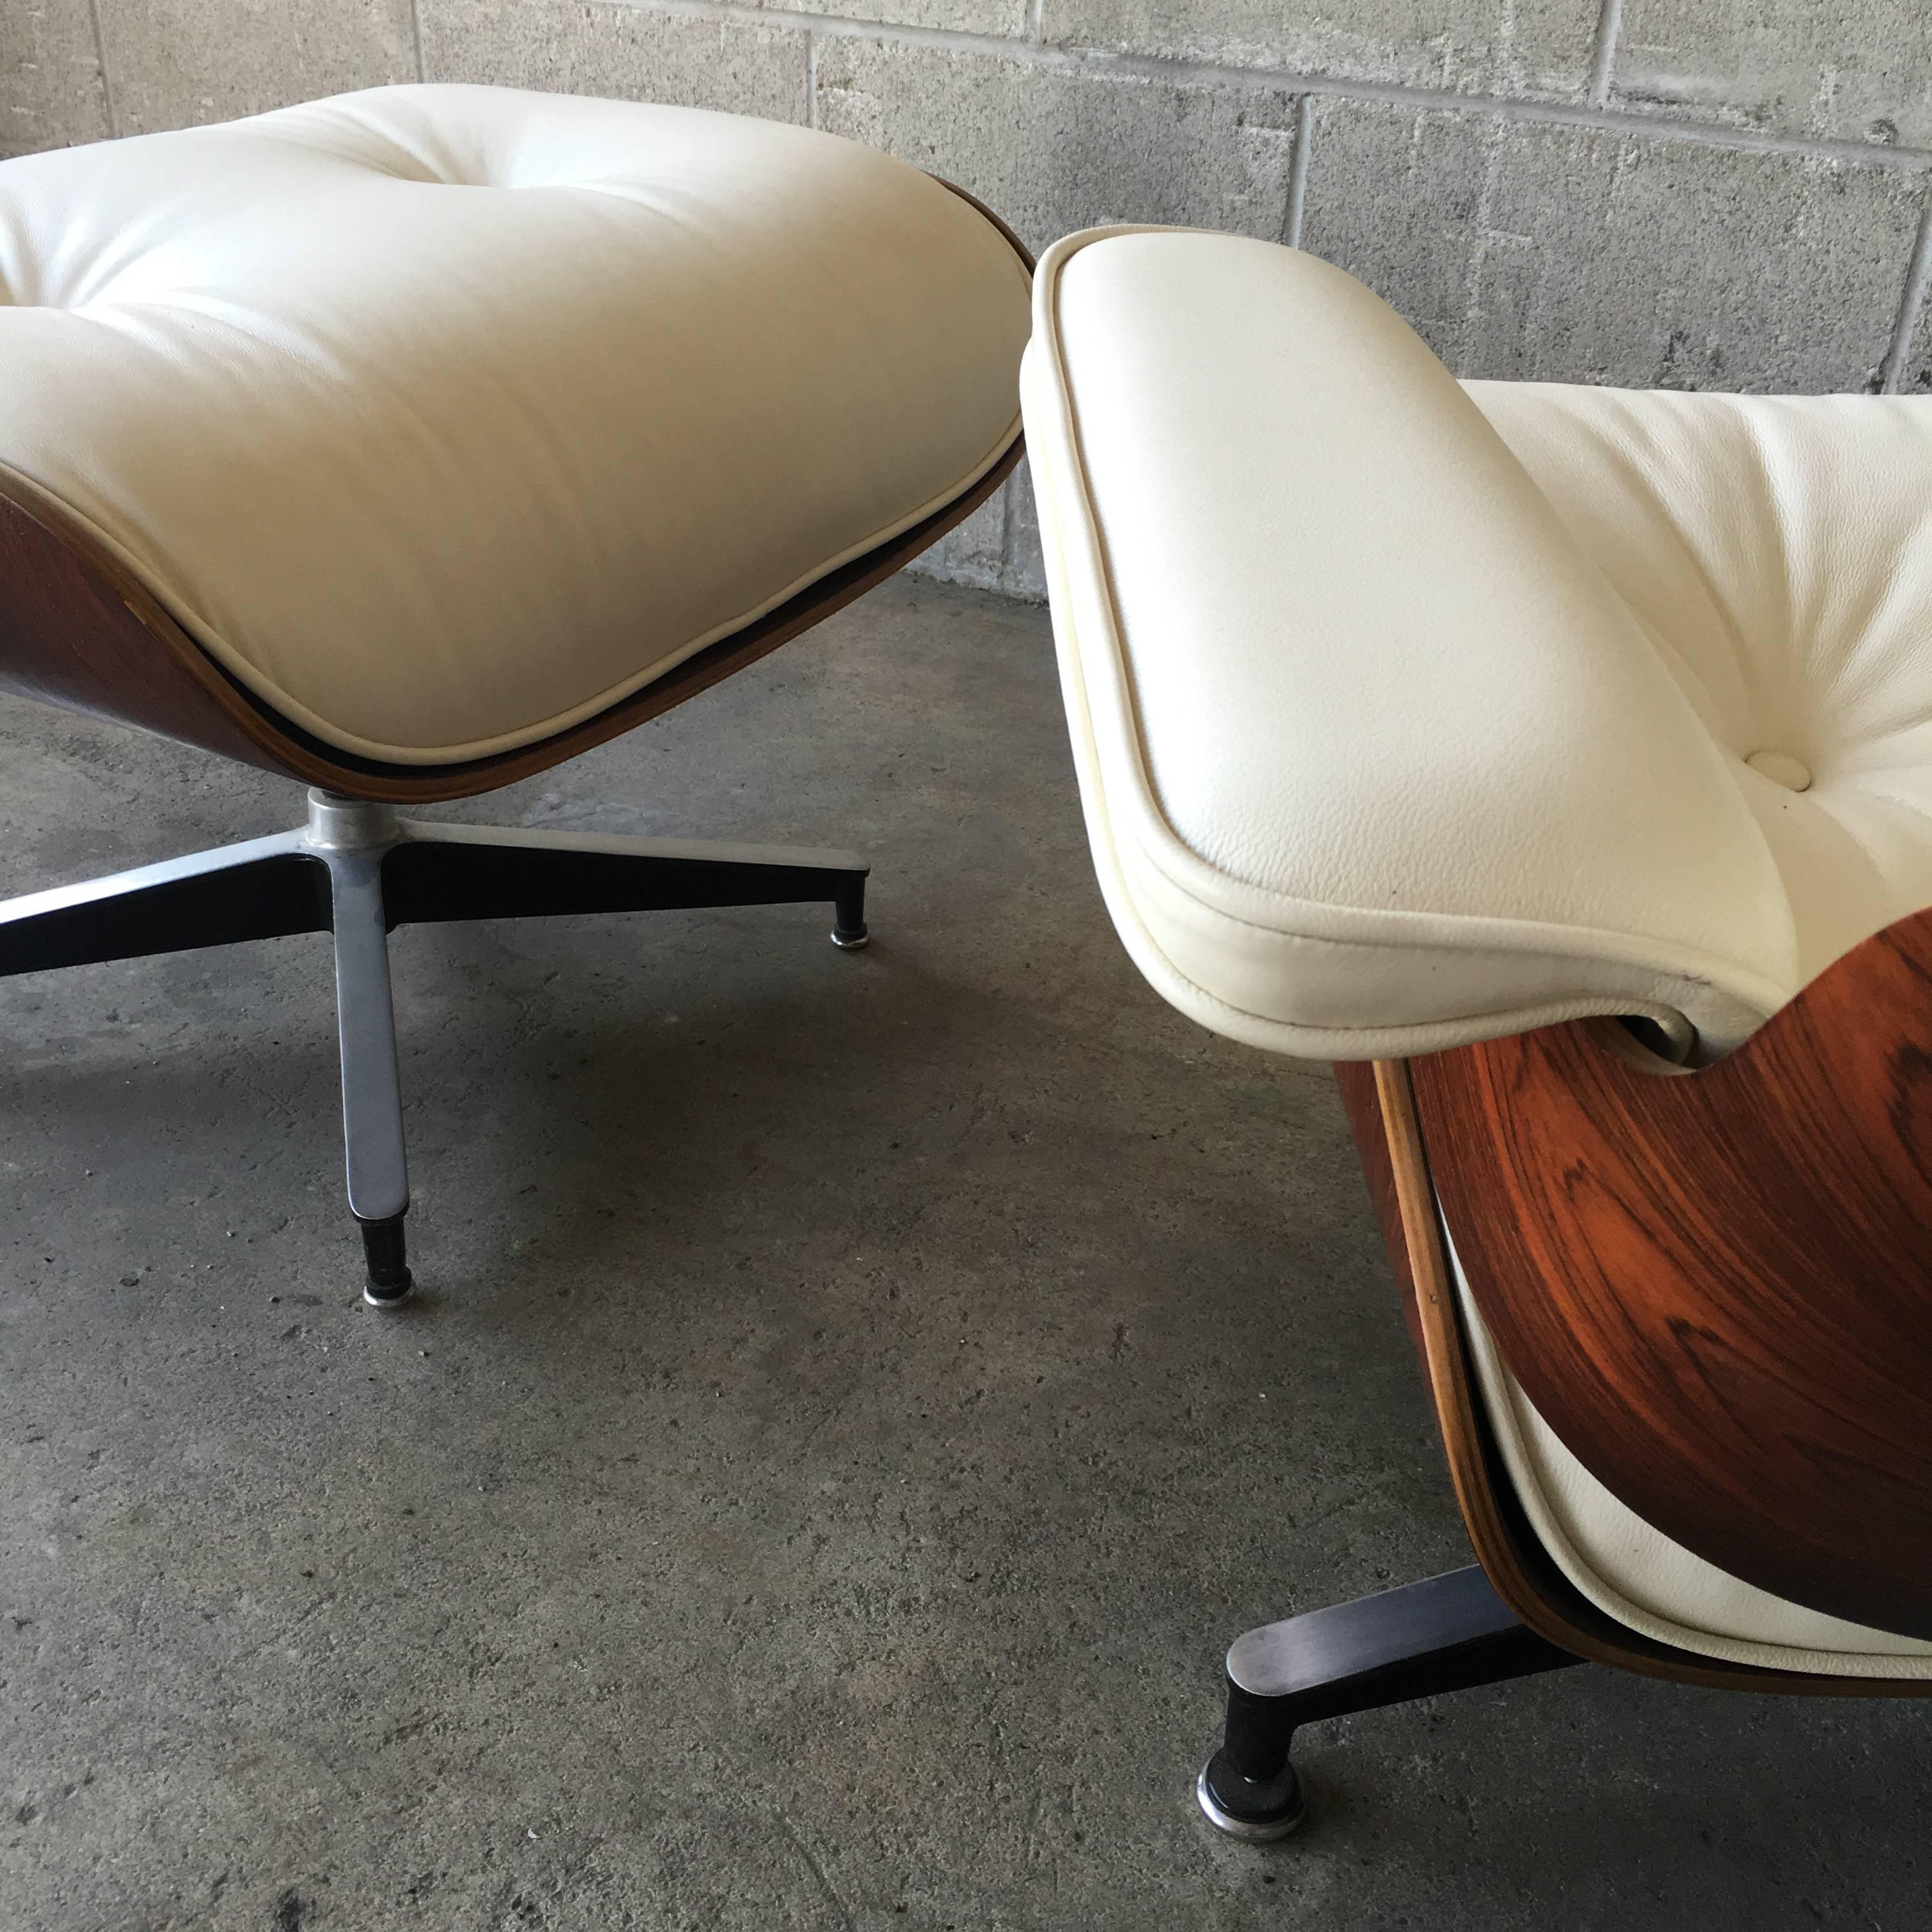 Herman Miller Eames lounge chair and ottoman in Brazilian rosewood and new ivory leather cushions. Rosewood refinished in excellent condition. New shock mounts installed in seat panels ($60” value). Signed and guaranteed authentic. Cushions made to